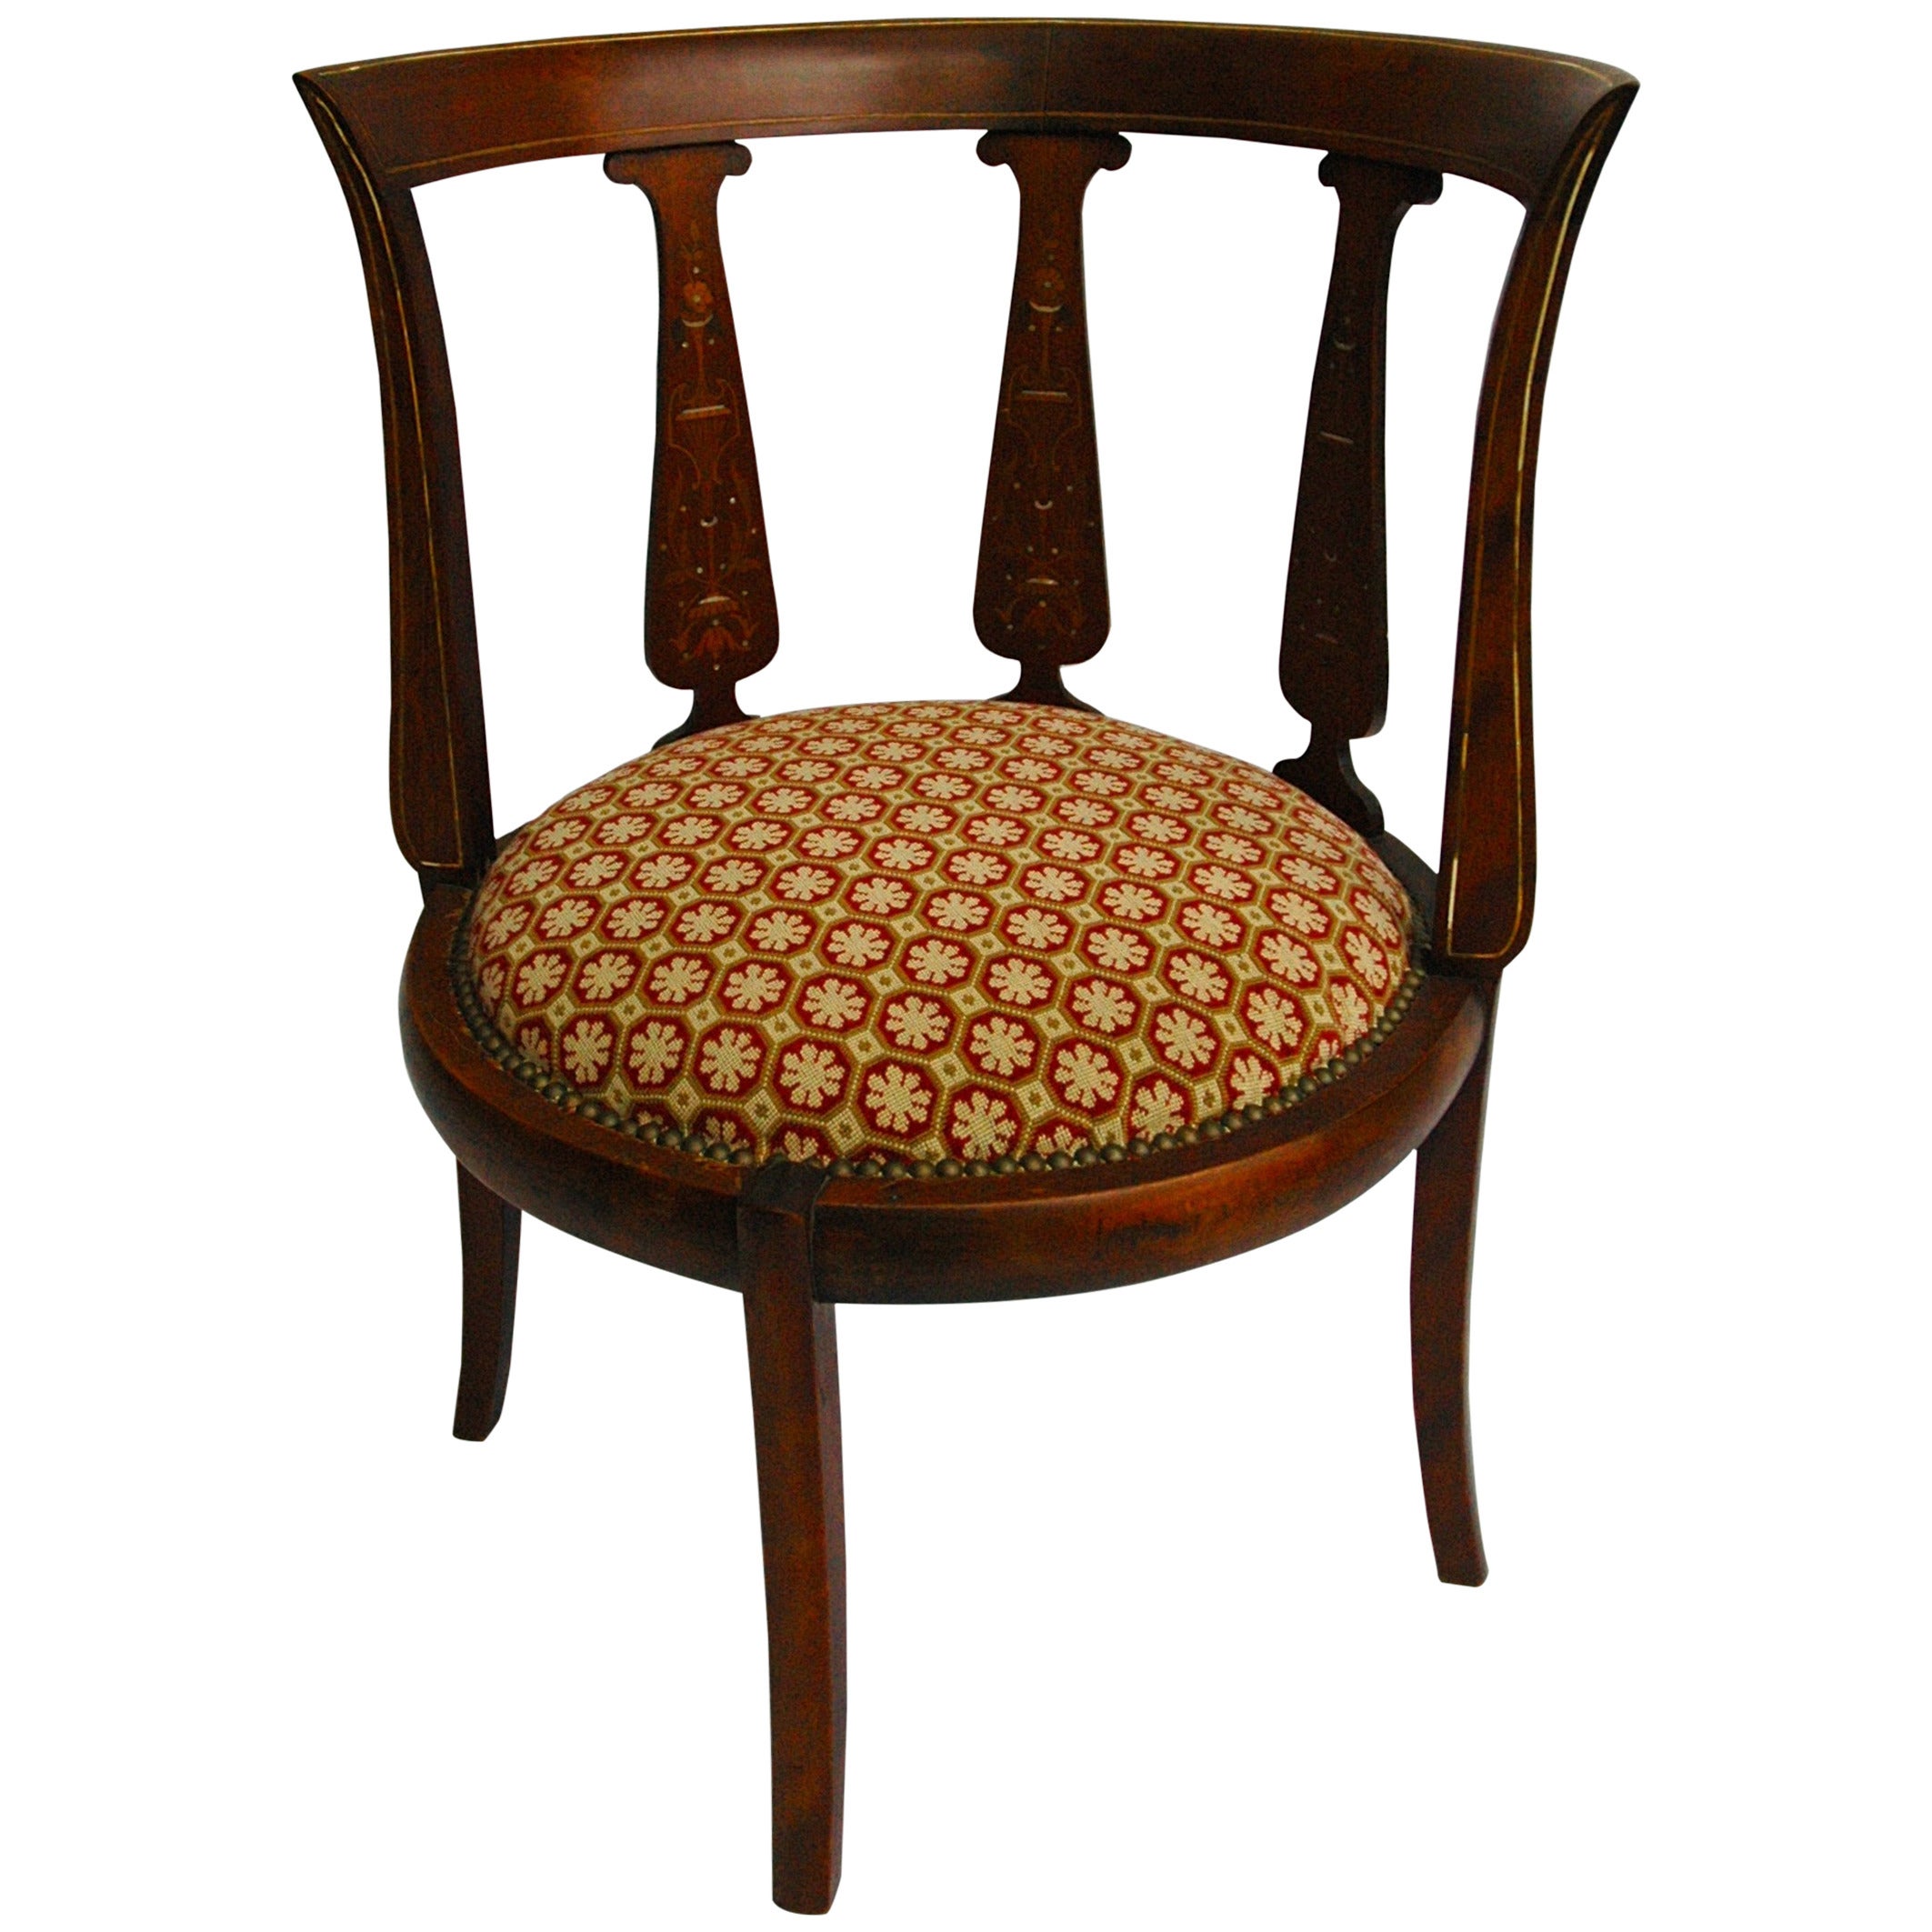 19th Century English Corner Chair with Mother-of-pearl Inlay